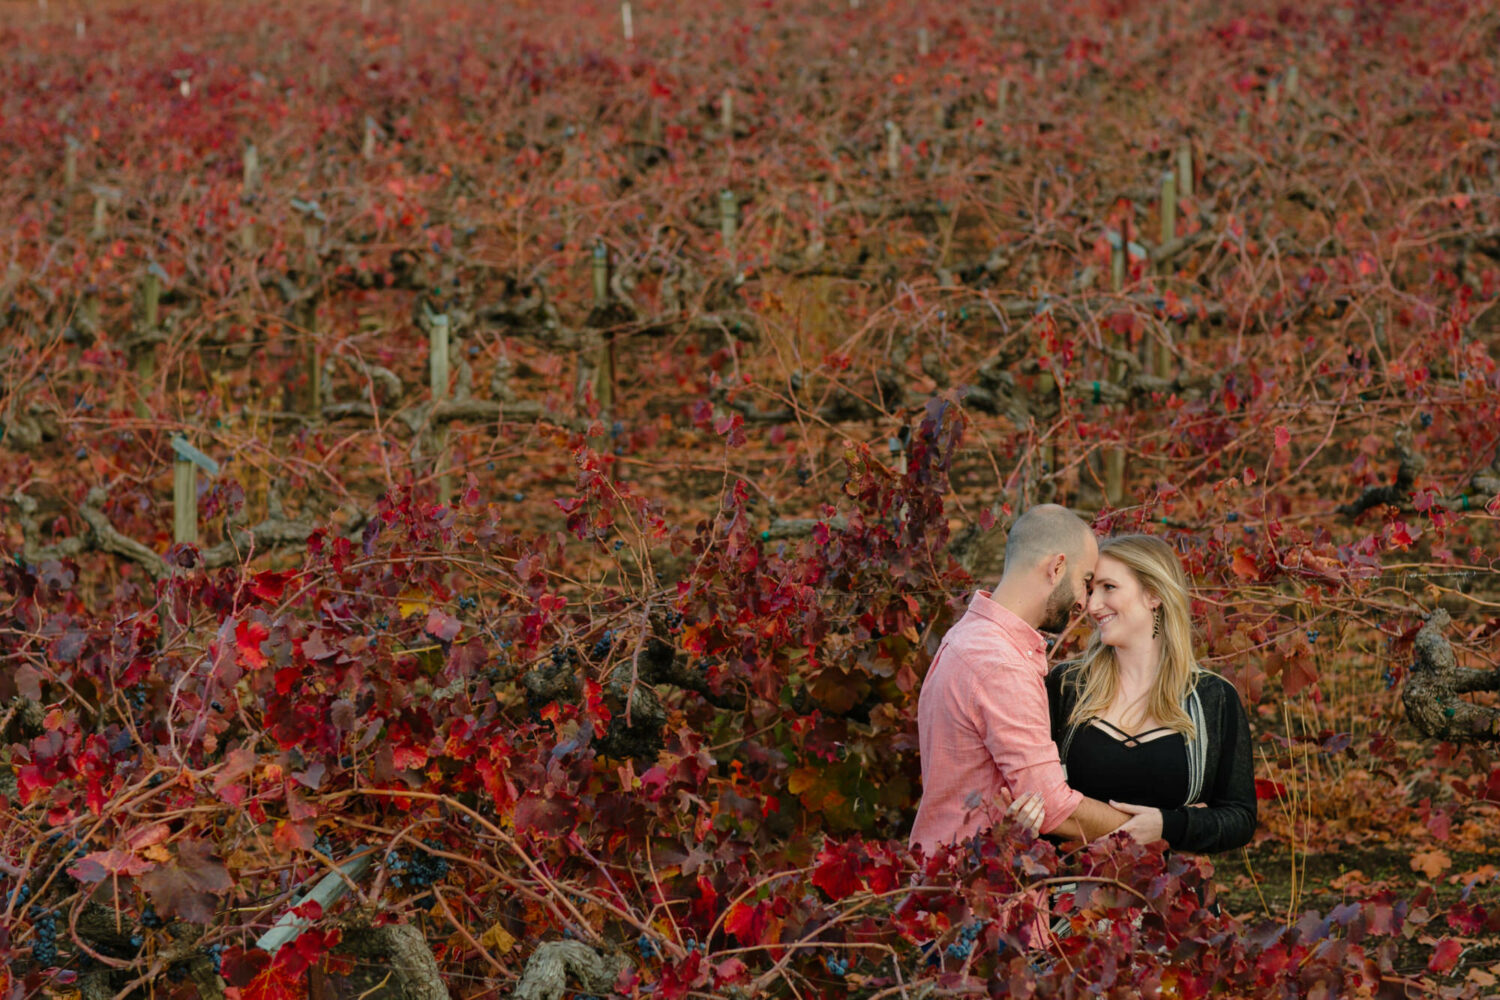 A colorful engagement portrait in a red vineyard with red leaves.